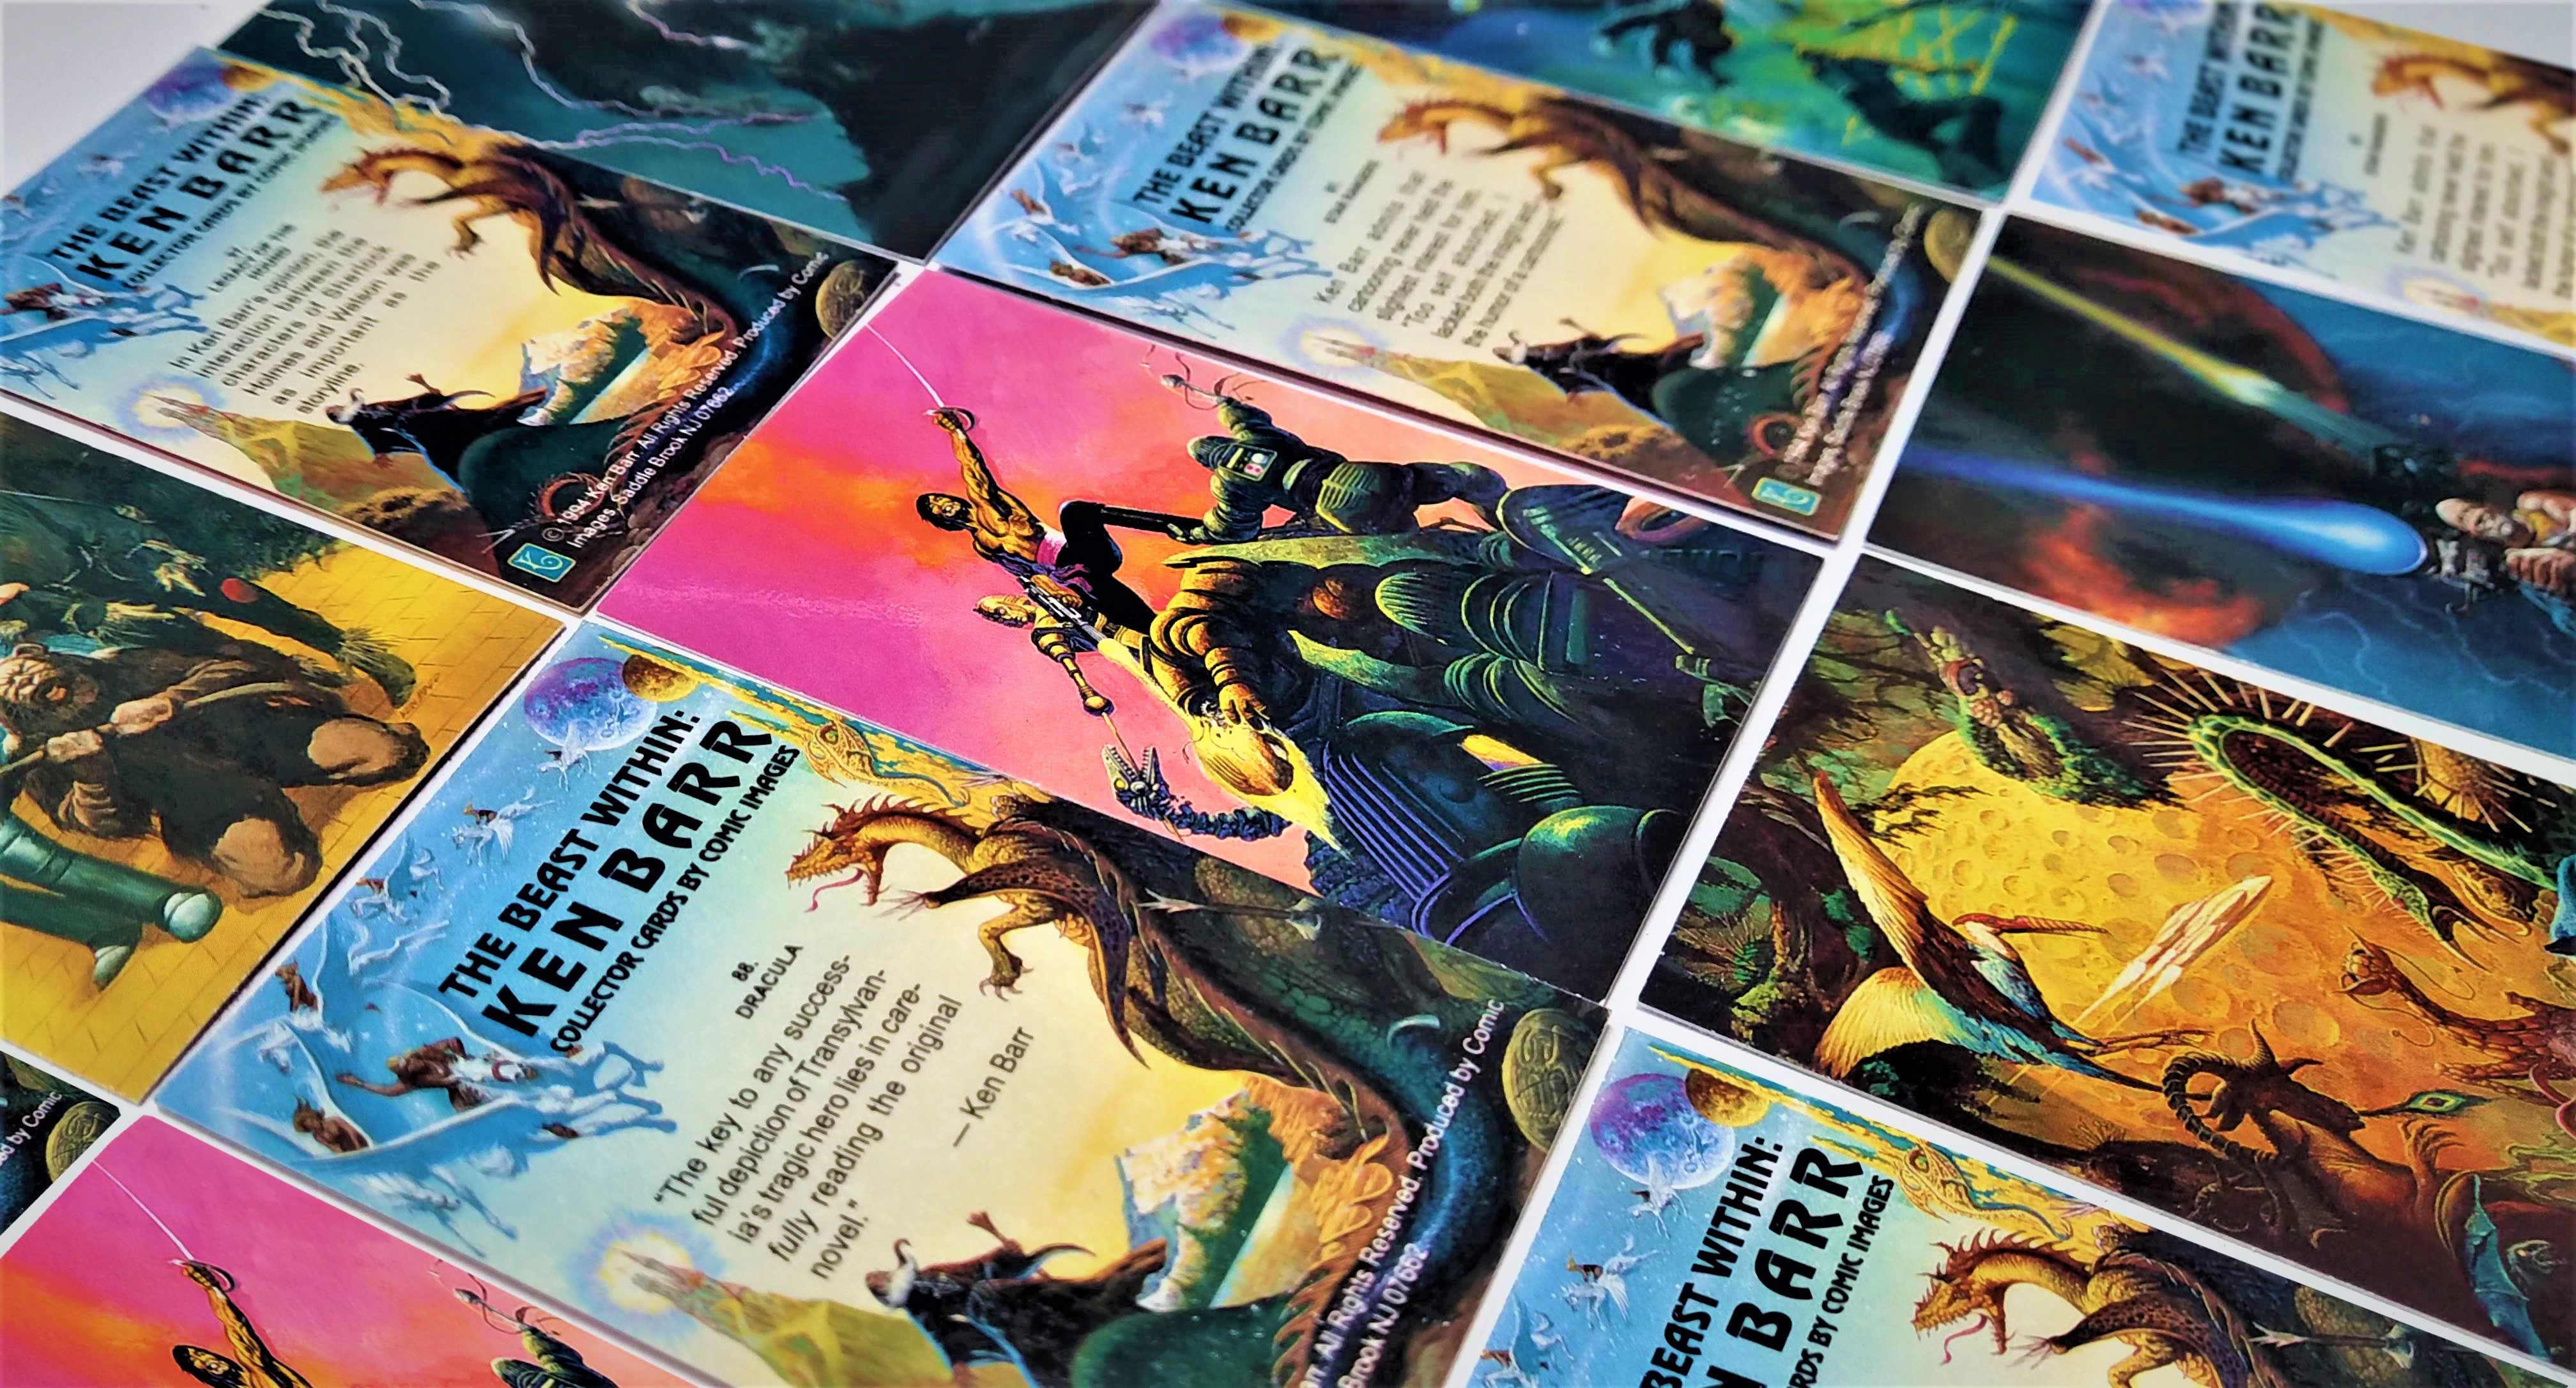 The Beast Within: Ken Barr Fantasy Art Trading Cards Pack (Lot of 16 Packs) - Miraj Trading